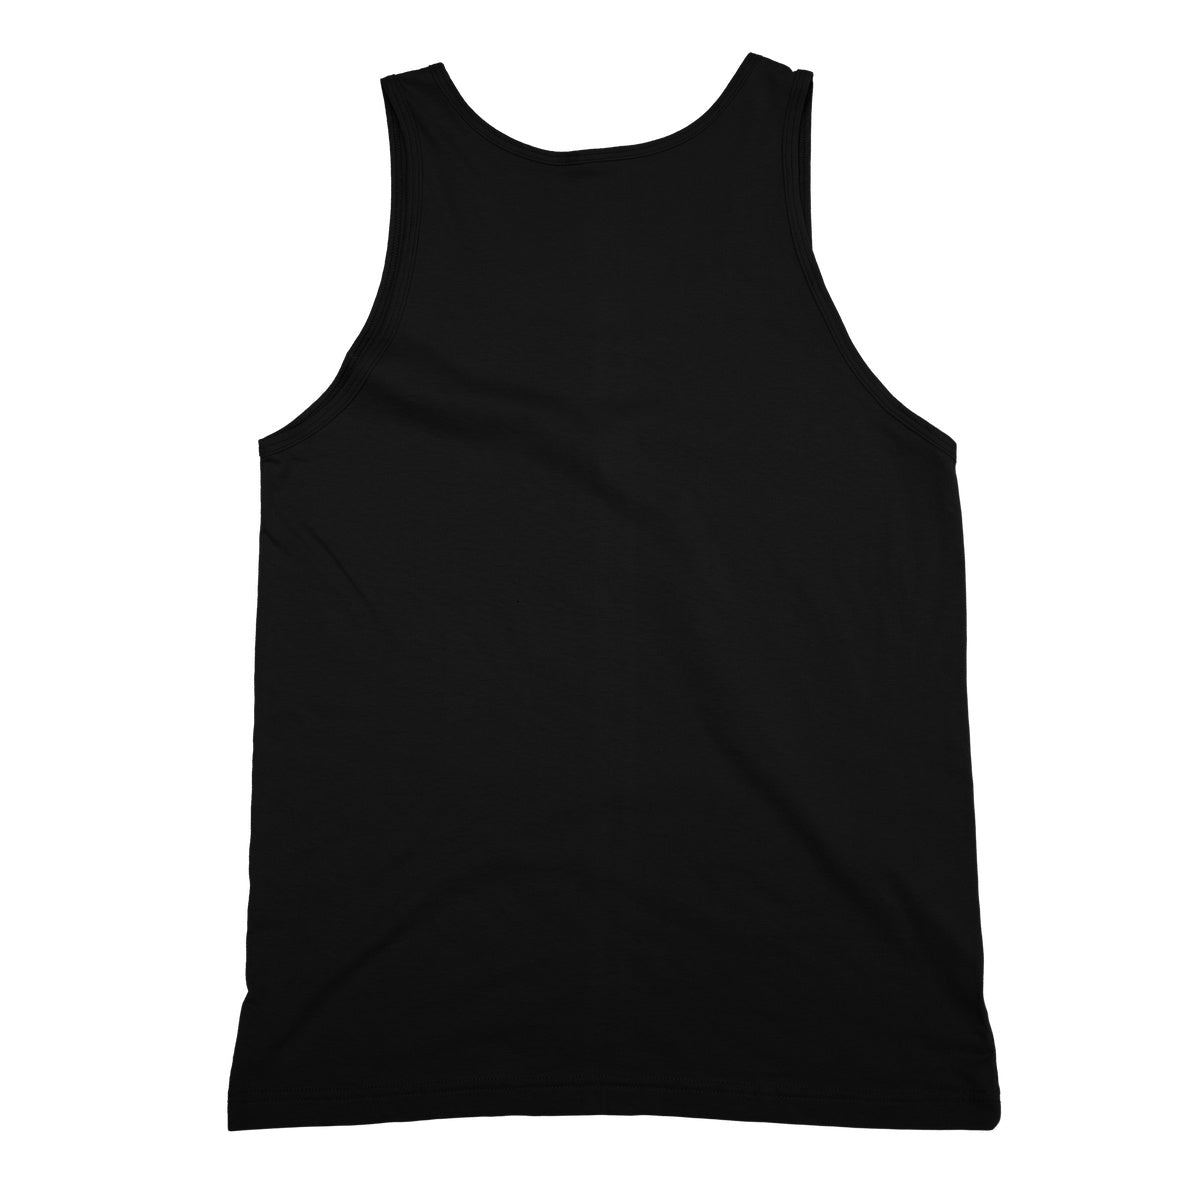 Let It Out Softstyle Tank Top